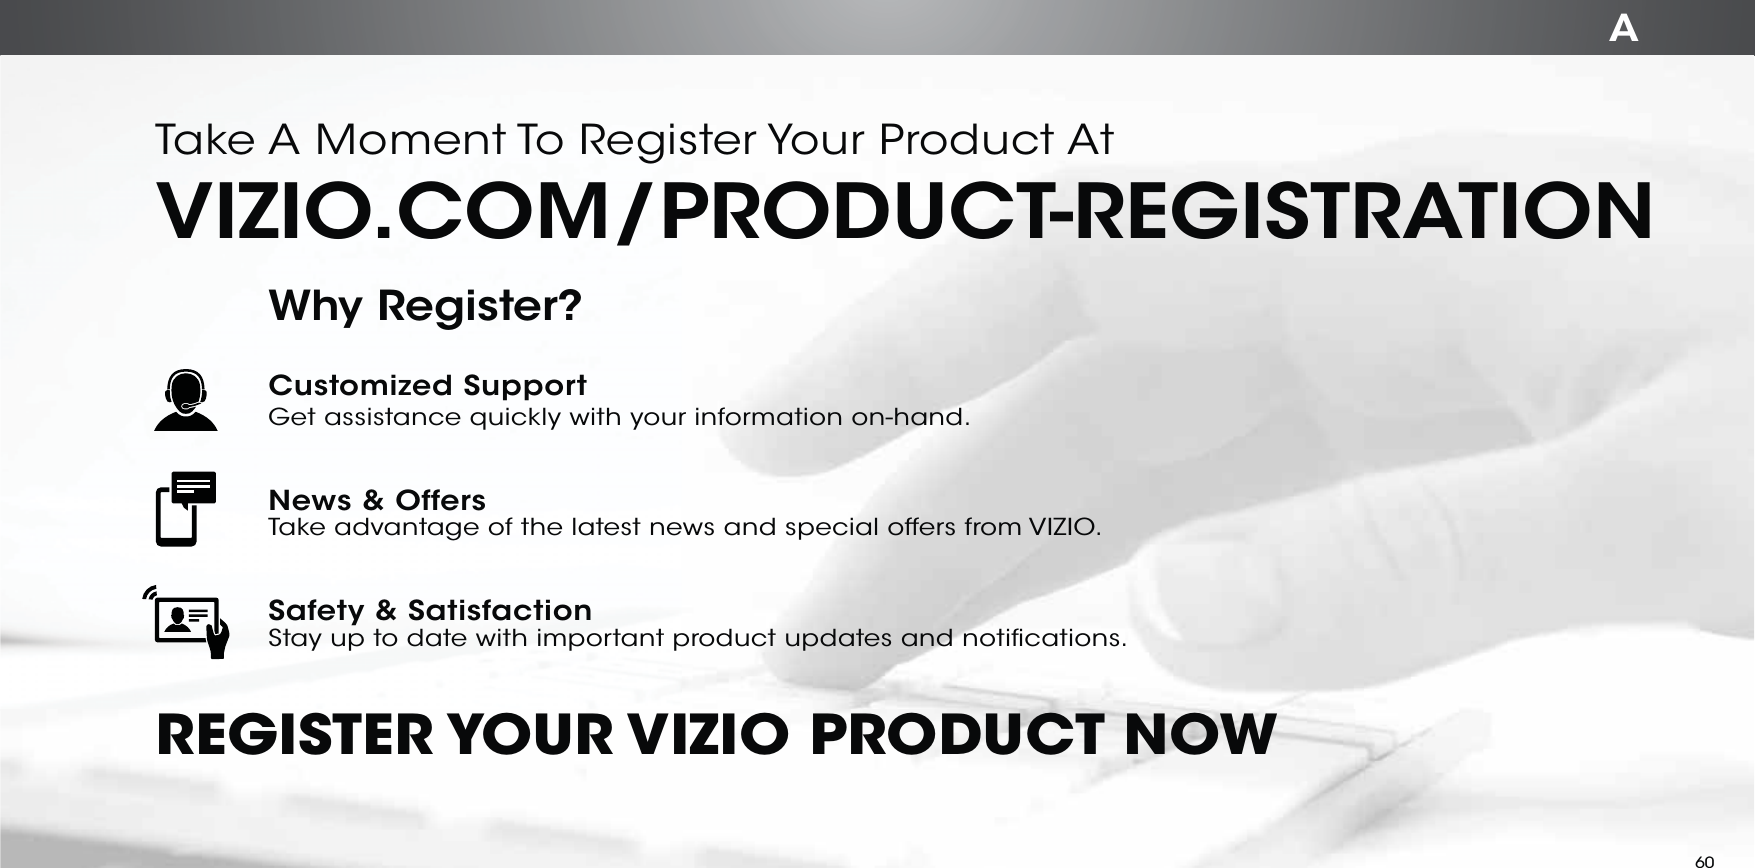 ATake A Moment To Register Your Product AtVIZIO.COM/PRODUCT-REGISTRATIONREGISTER YOUR VIZIO  PRODUCT  NOWCustomized SupportGet assistance quickly with your information on-hand.News &amp; OffersTake advantage of the latest news and special offers from VIZIO.Safety &amp; SatisfactionStay up to date with important product updates and notifications.Why Register?60